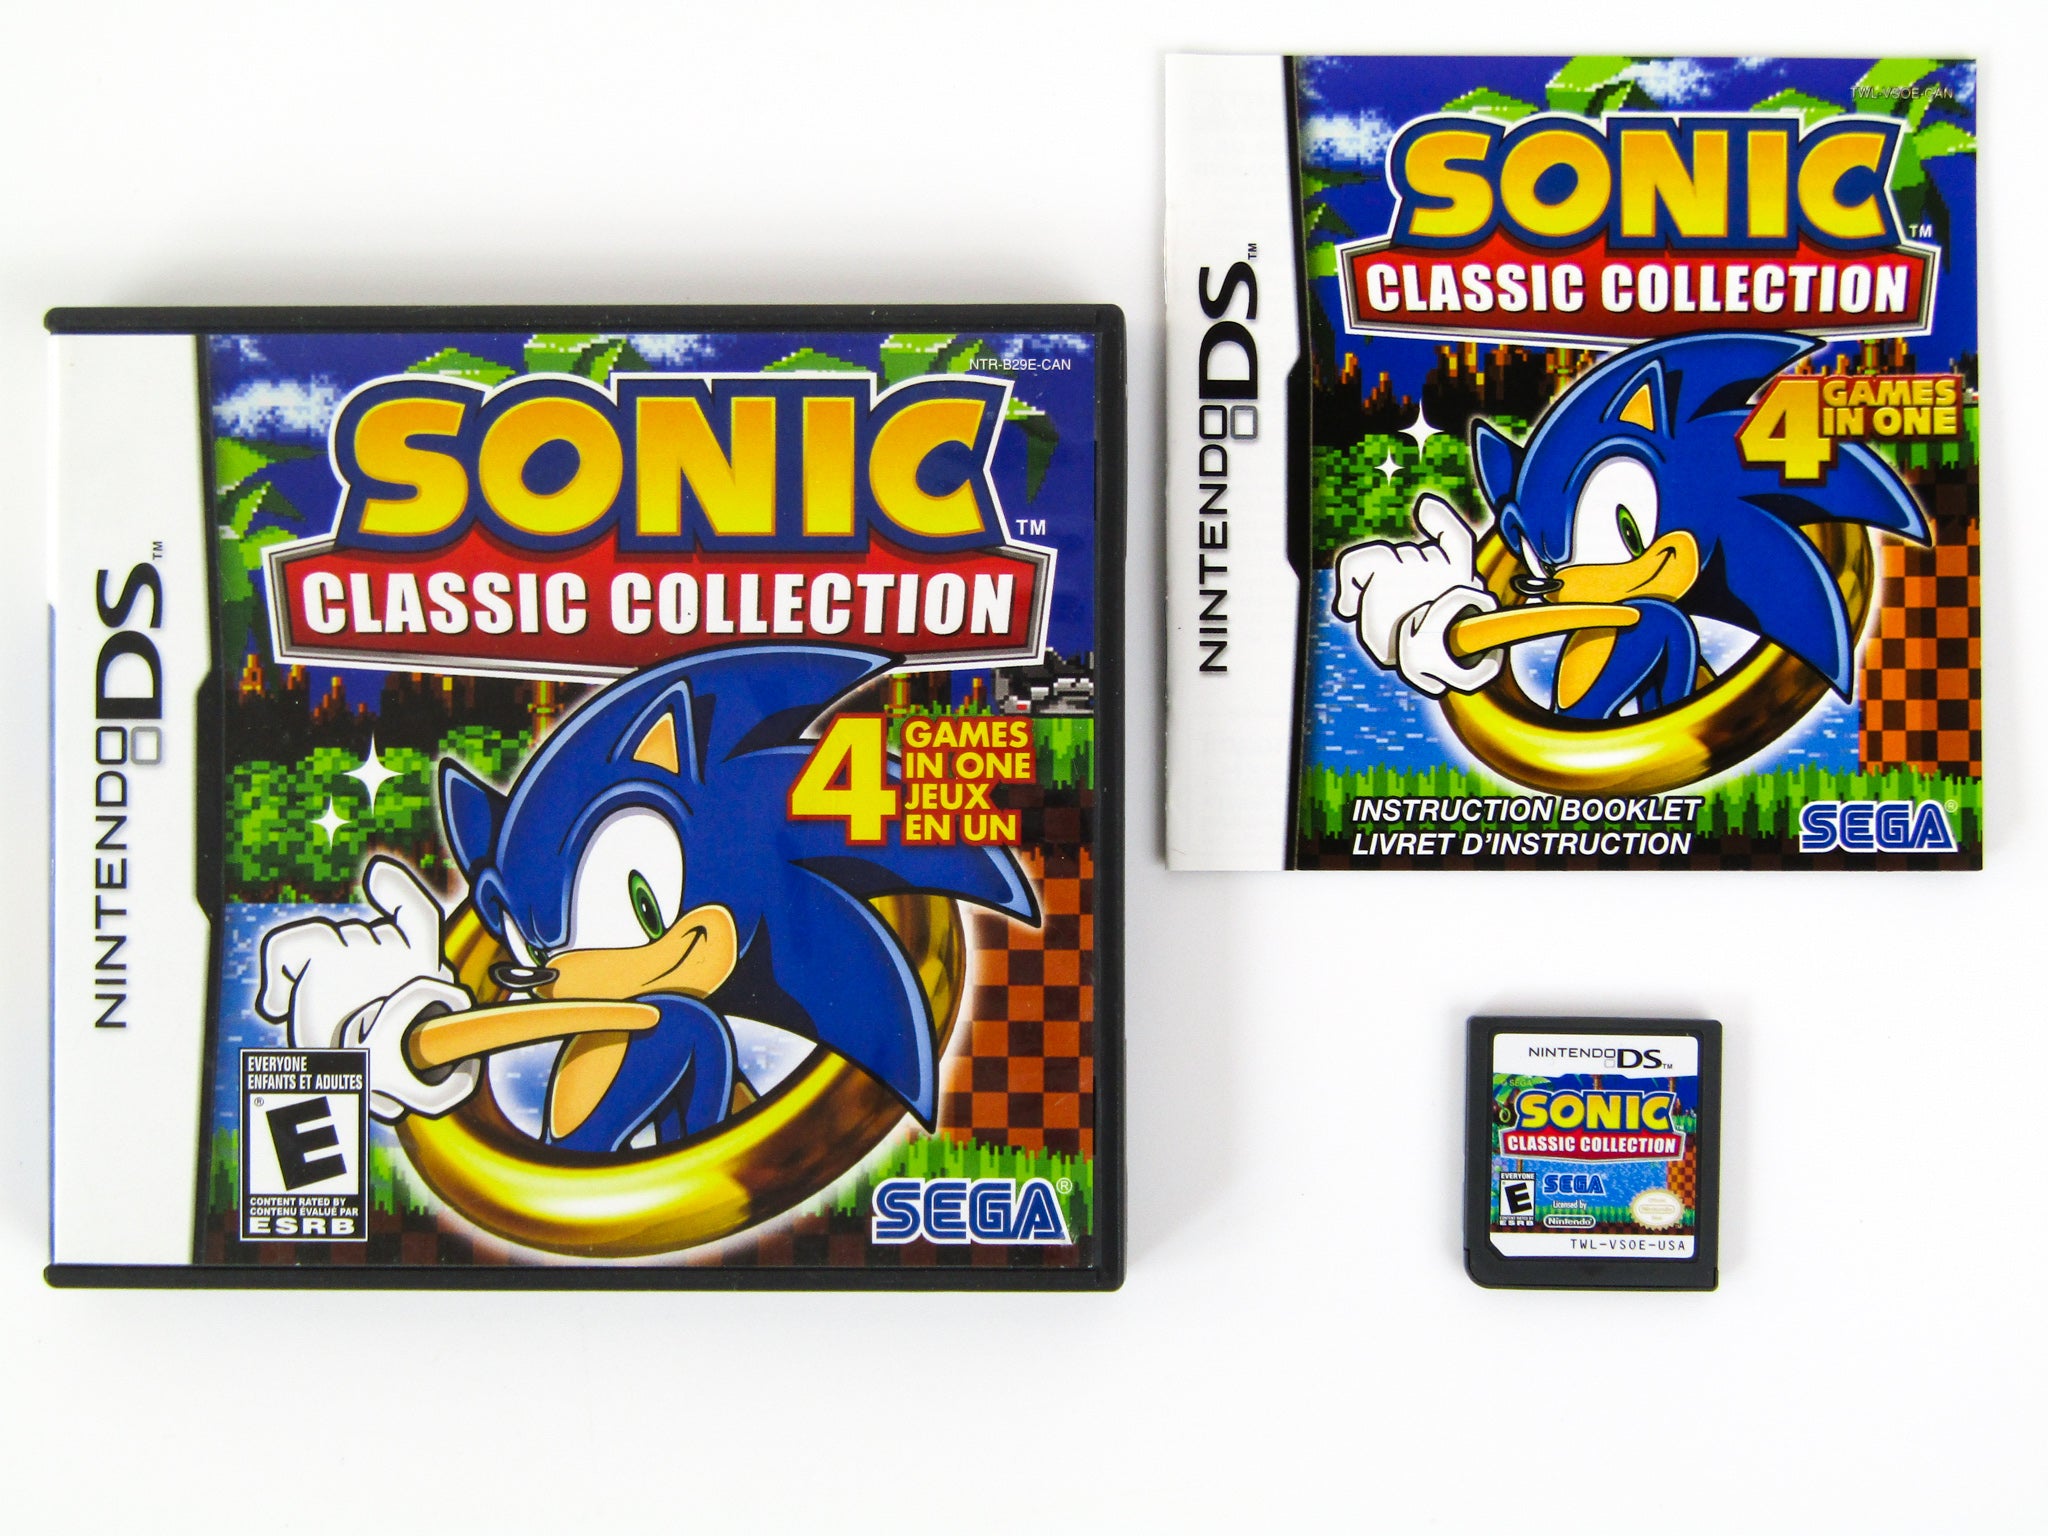 Sonic Classic Collection On Nintendo DS Cut Content Including A